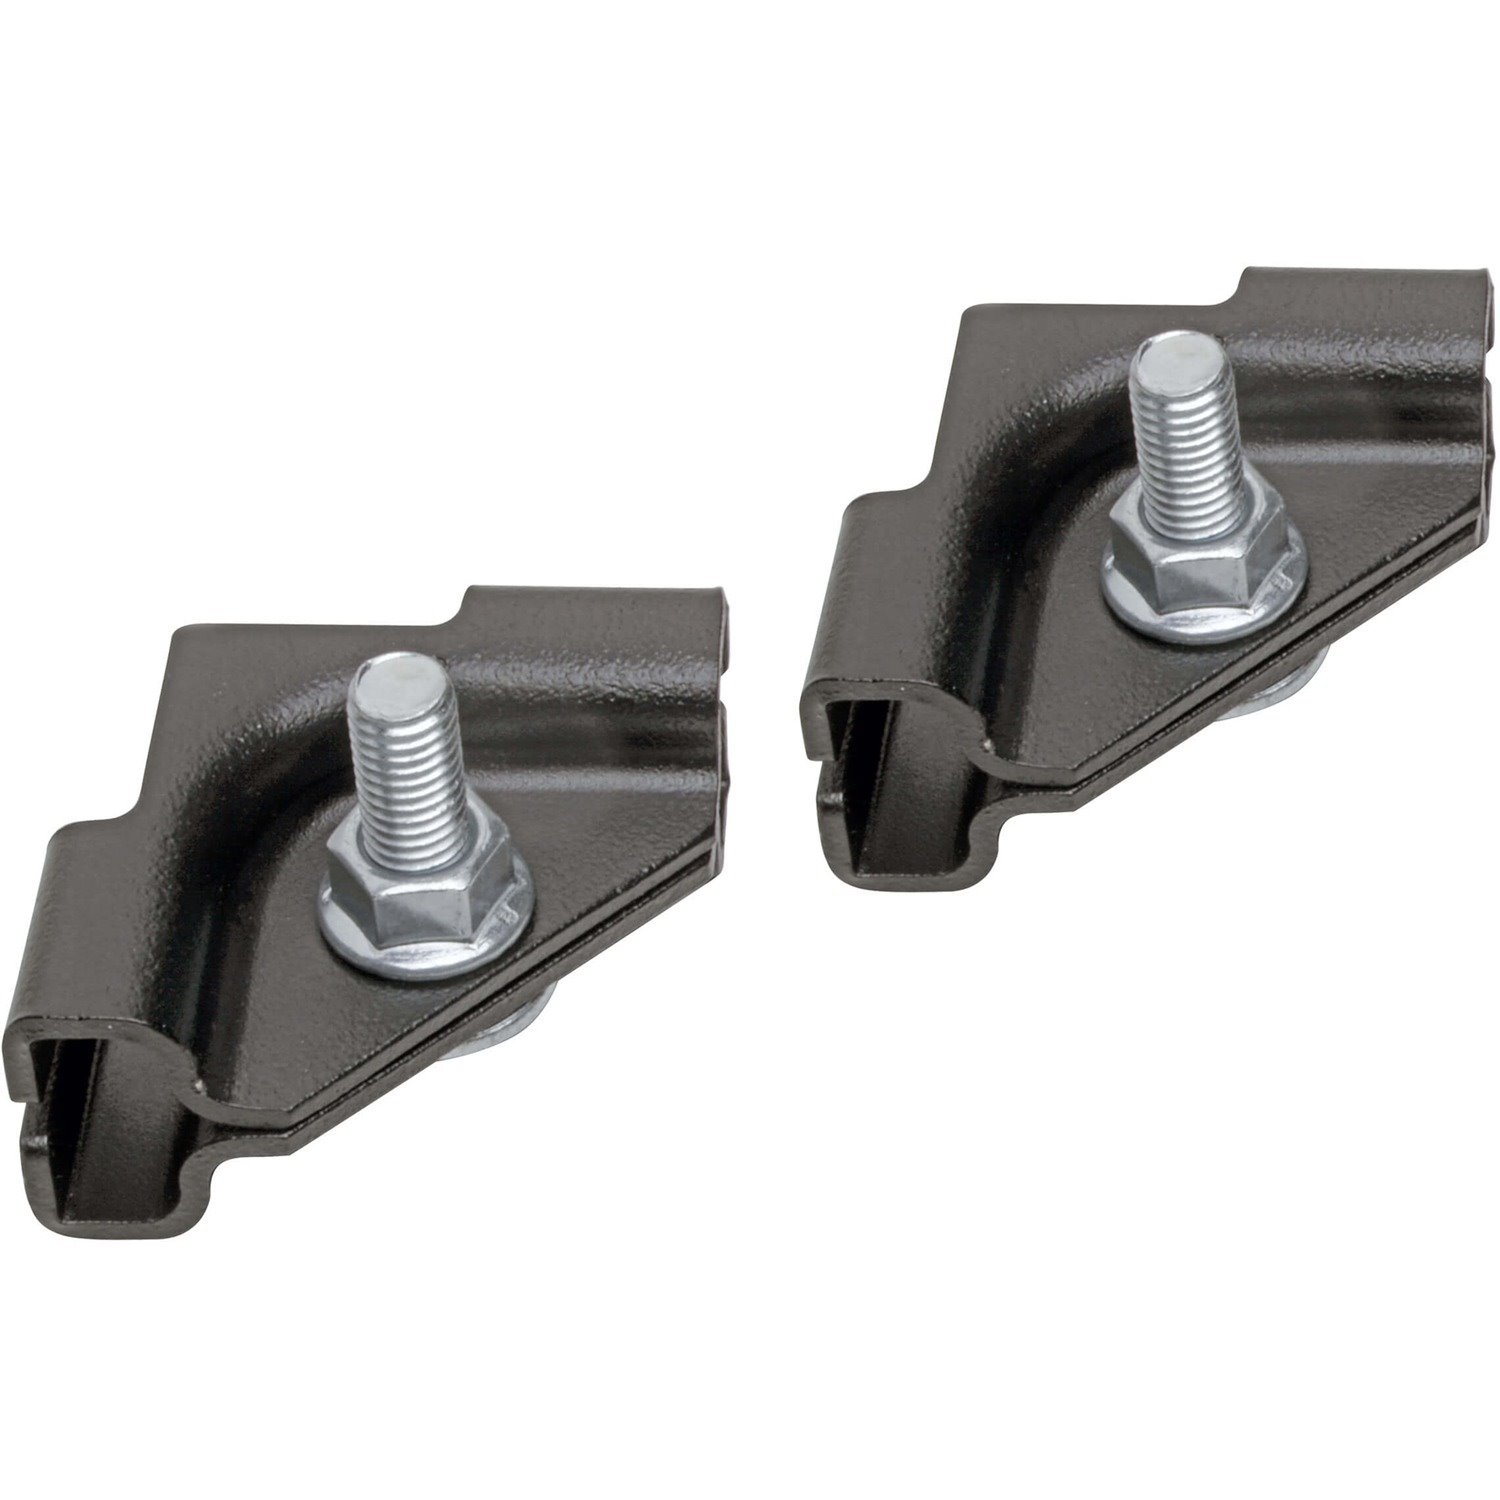 Tripp Lite by Eaton Junction-Splice Kit for 90-Degree Ladder Runway Connections - Hardware Included